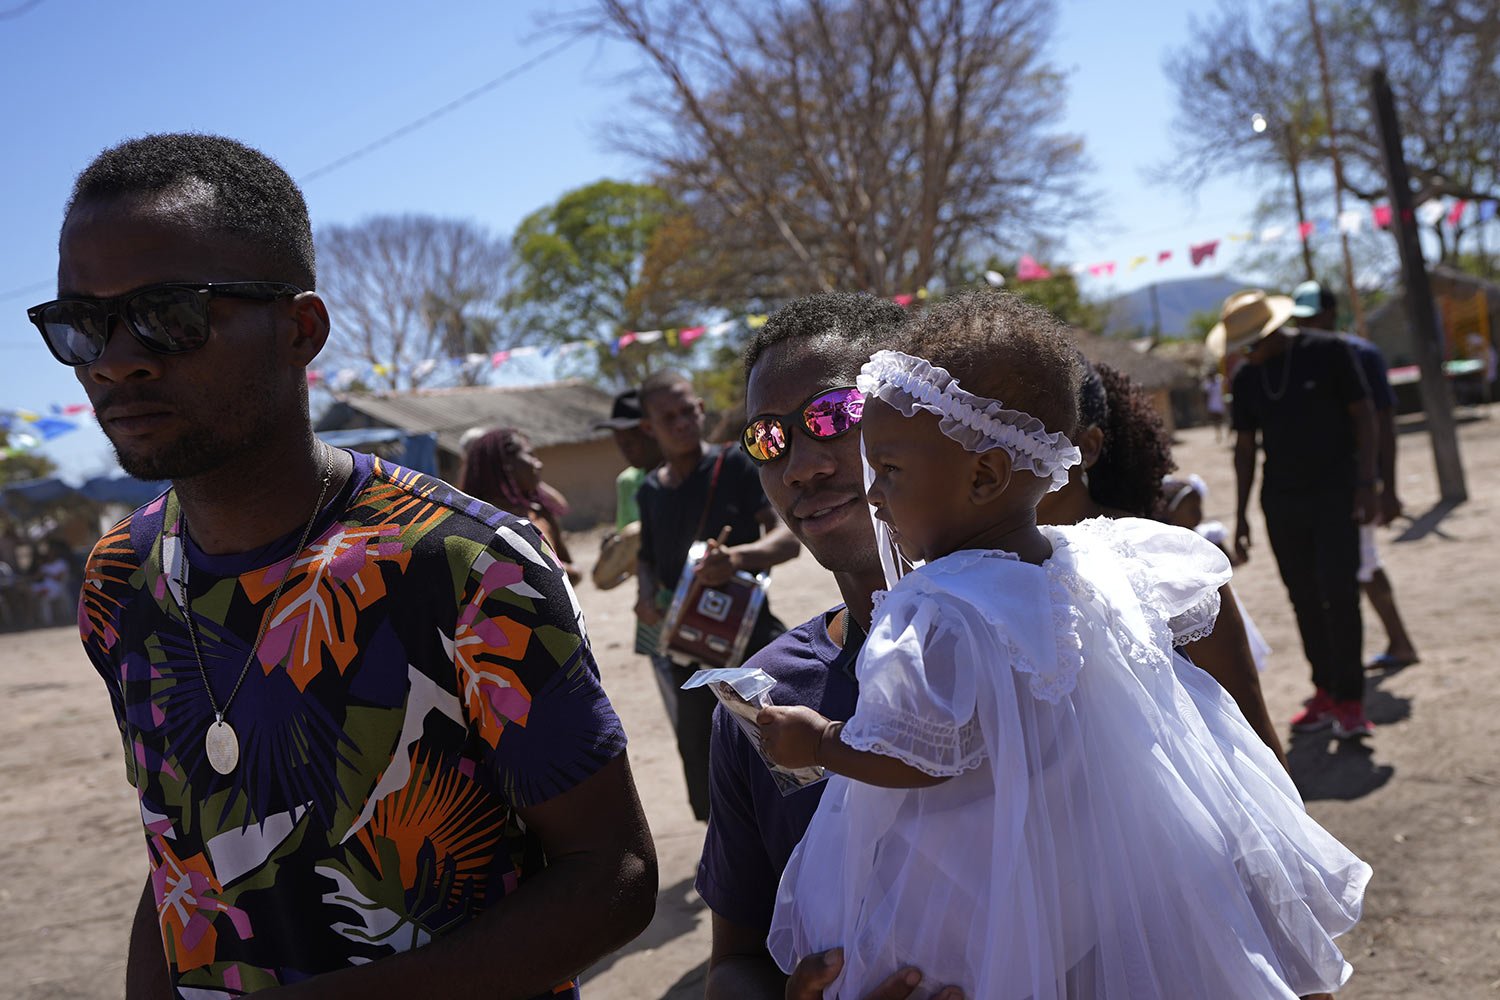  Residents leave a baptism ceremony at the end of a week-long pilgrimage honoring the patron saint in Cavalcante, Goias state, Brazil, Aug. 15, 2022. (AP Photo/Eraldo Peres) 